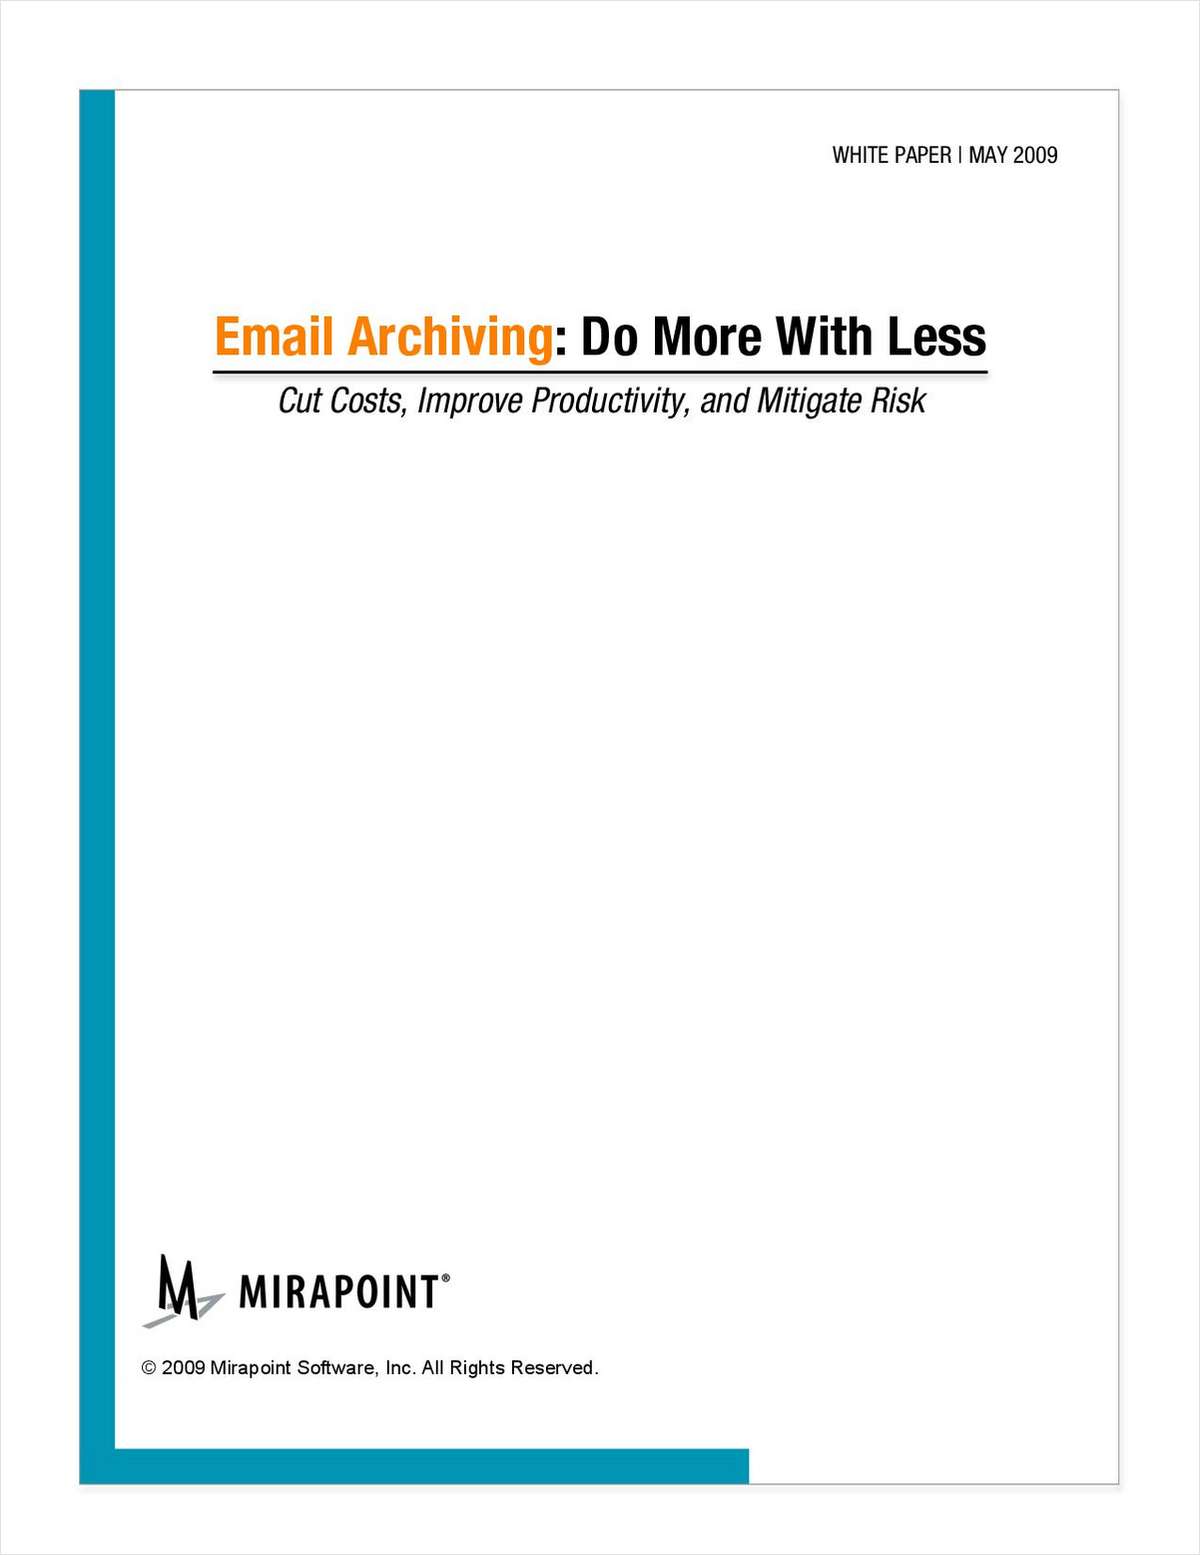 Email Archiving: Cut Costs and Mitigate Risk for your Enterprise